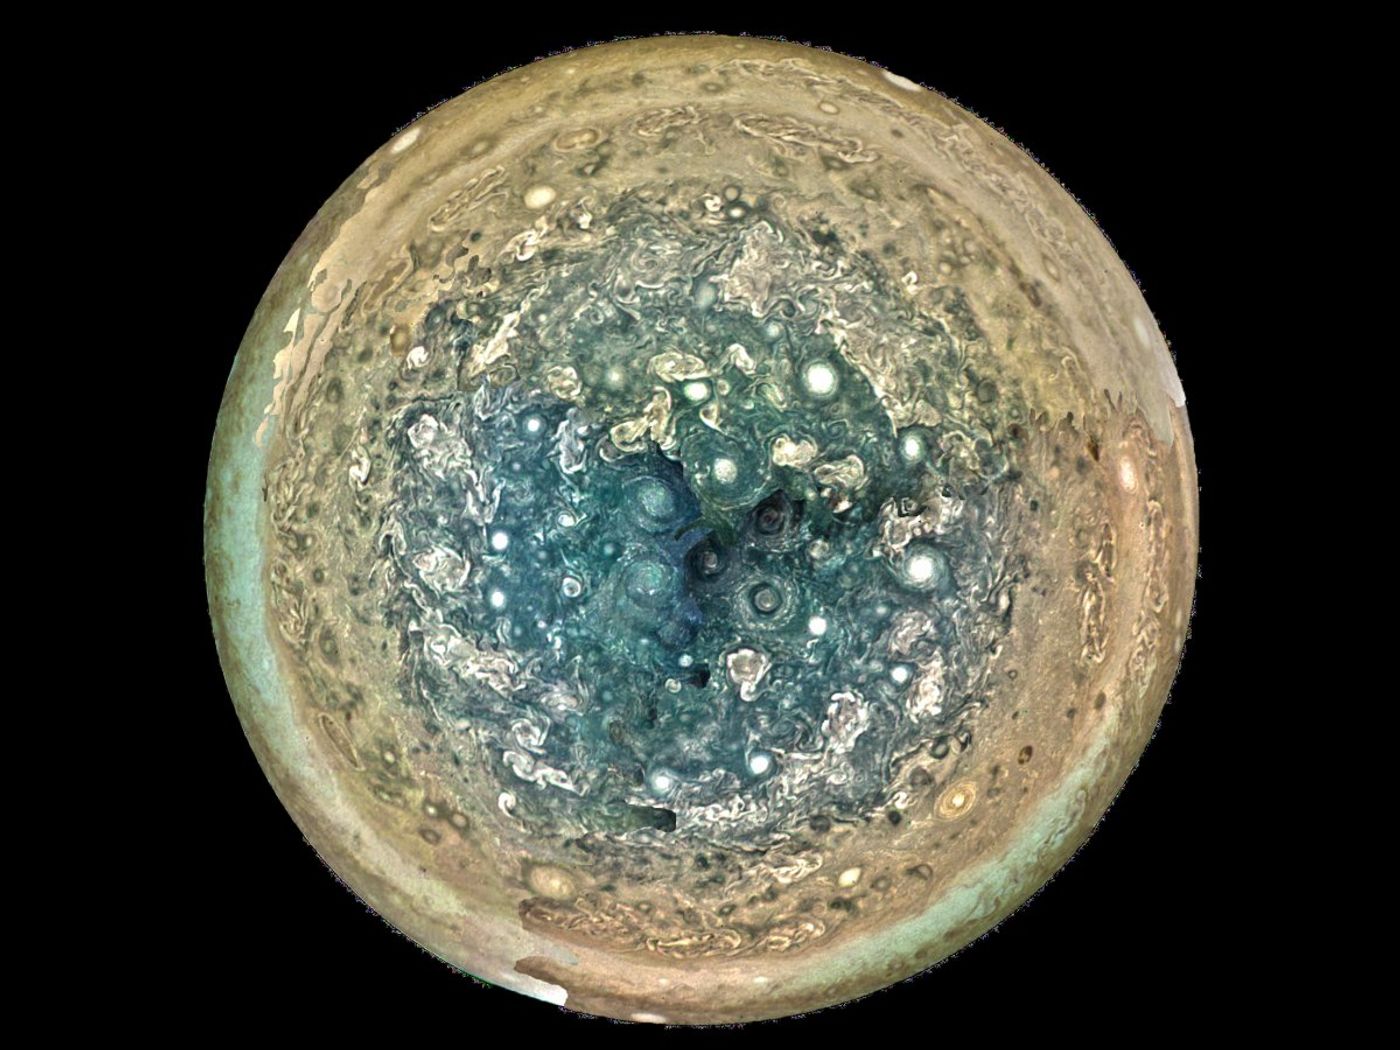 A look at Jupiter's South pole from the perspective of Juno.